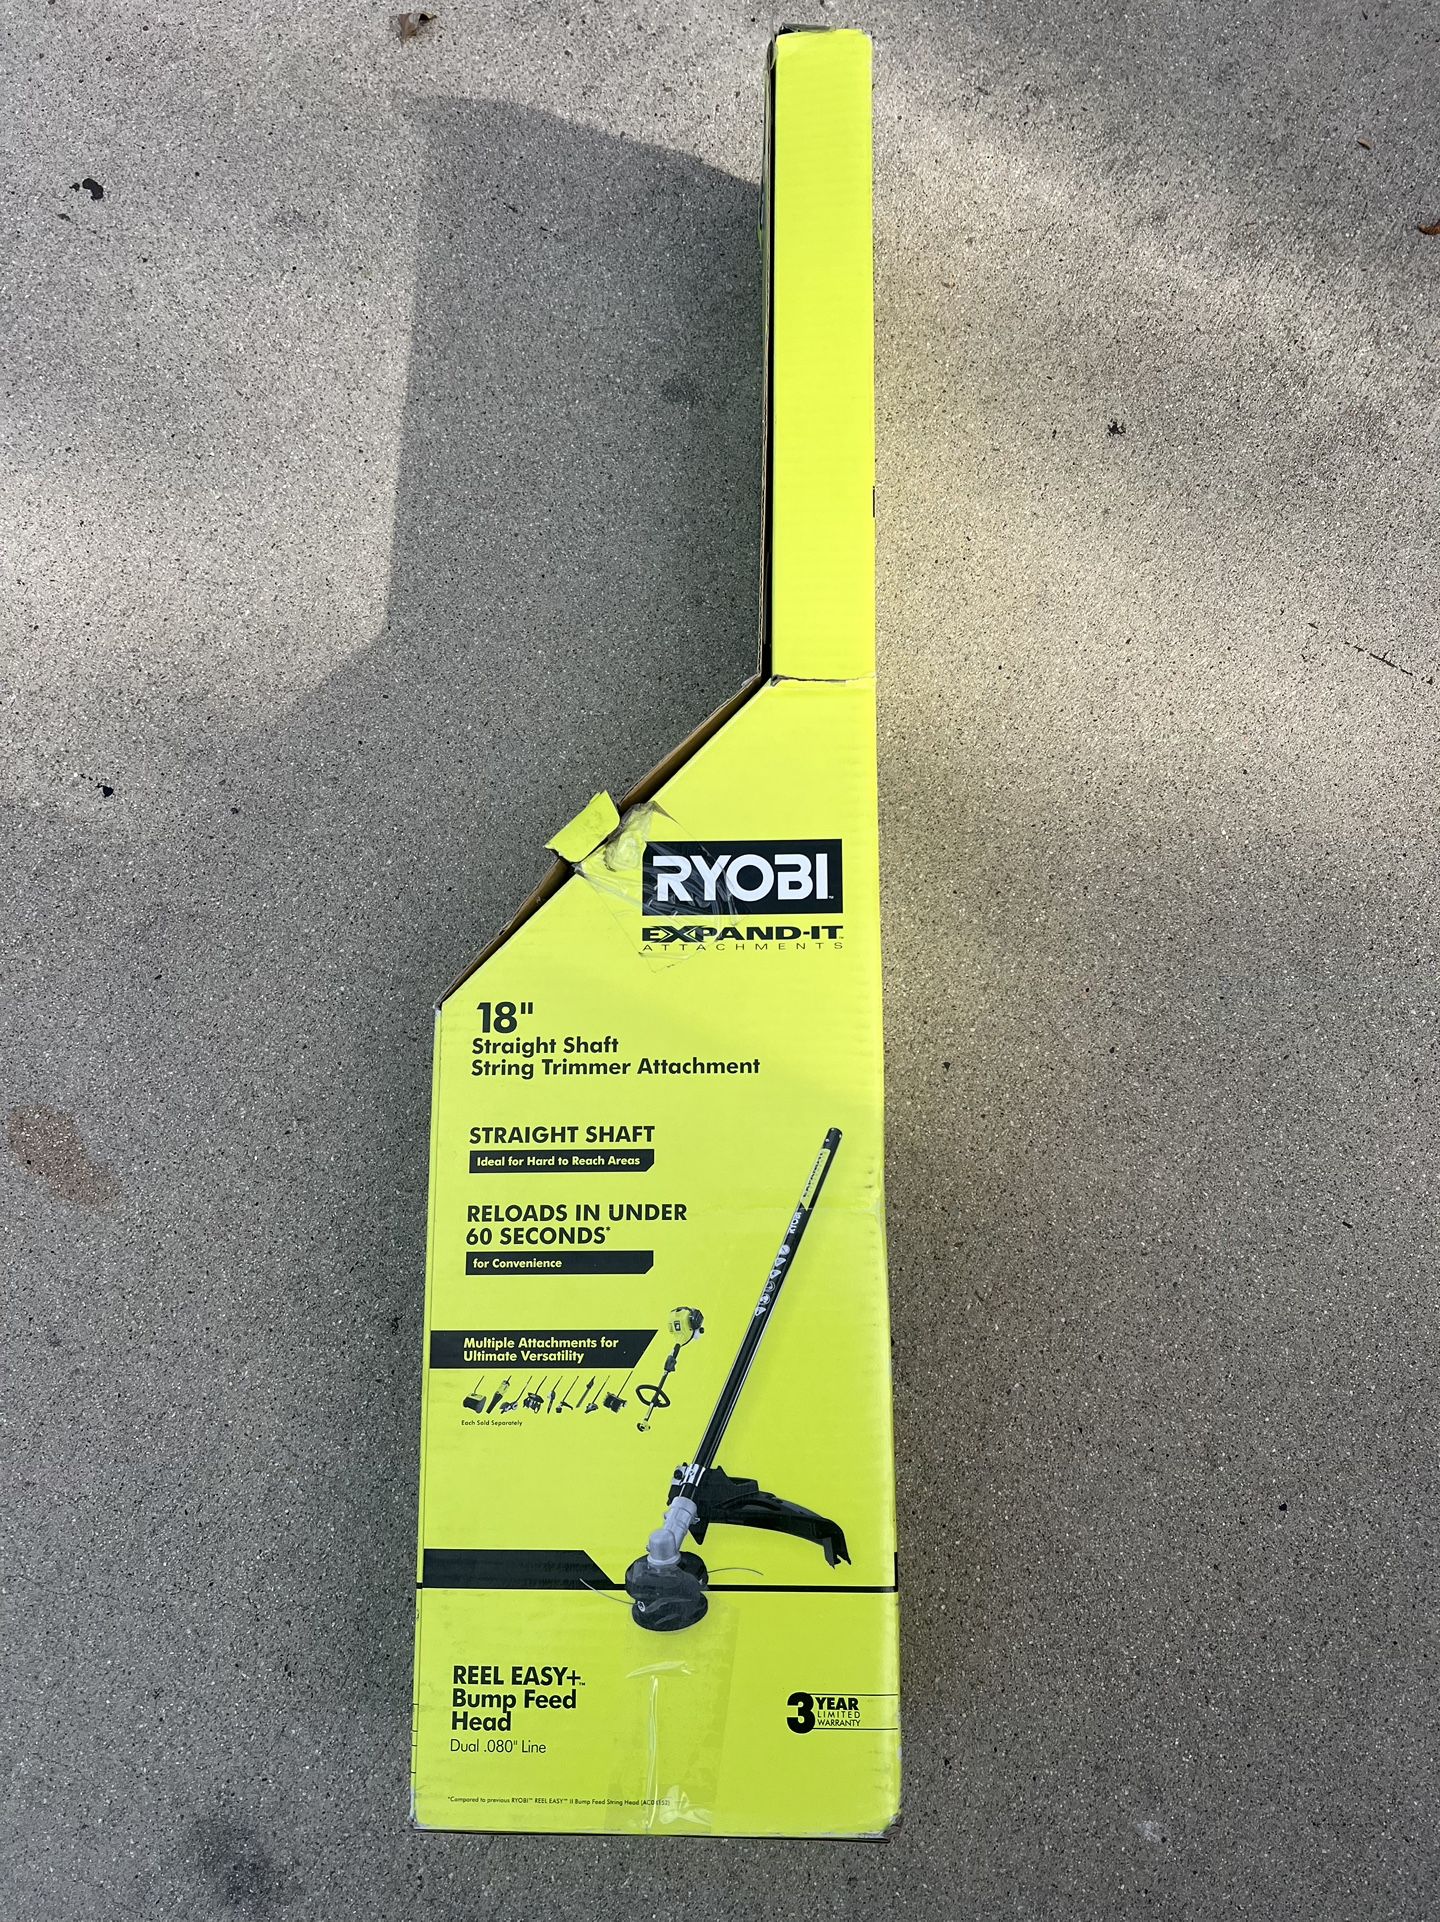 RYOBI Expand-It 18 in. Straight Shaft String Trimmer Attachment